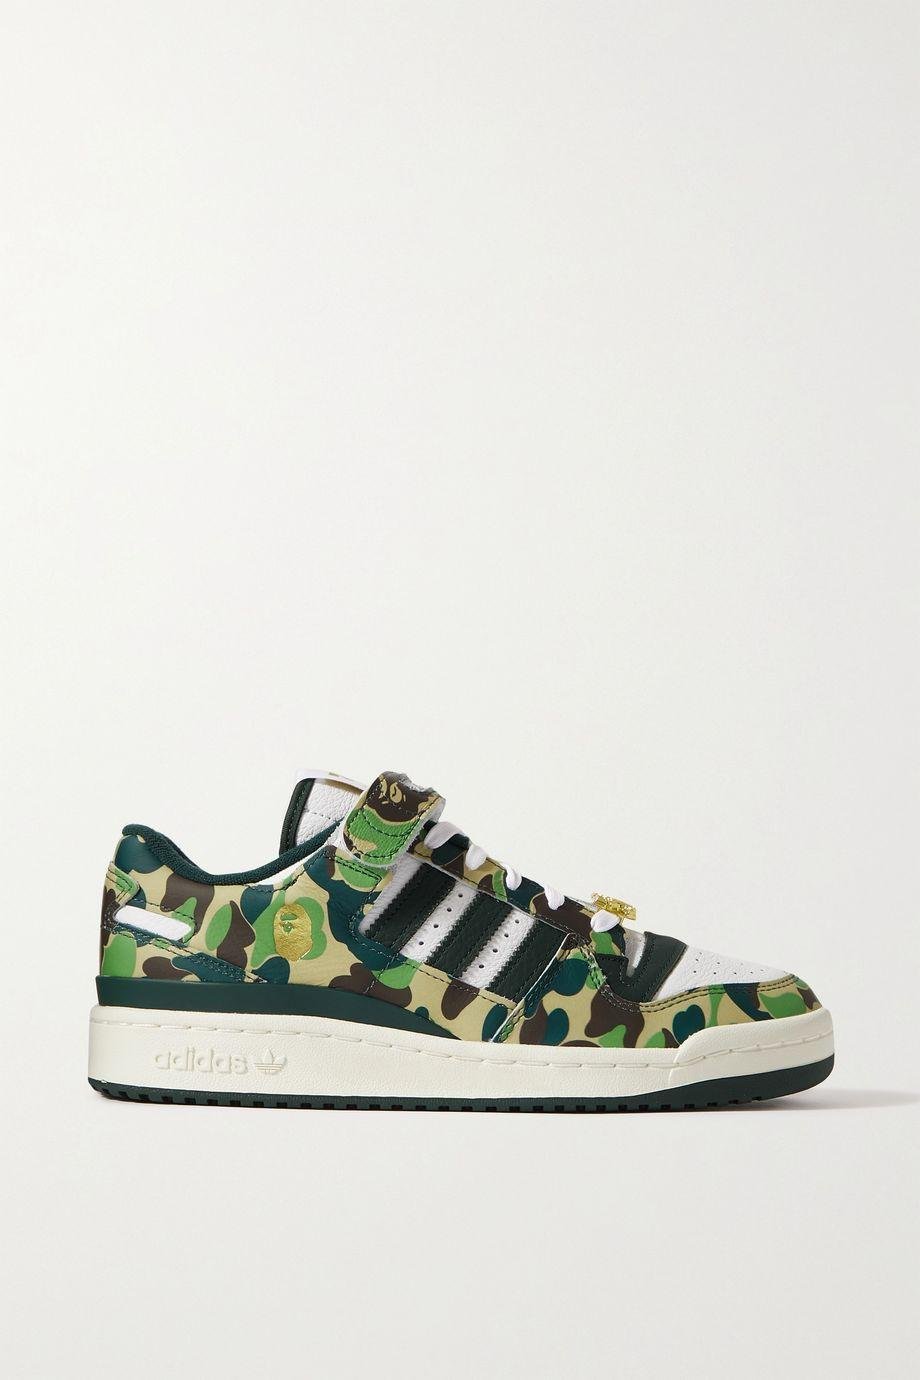 + BAPE Forum 84 paneled printed leather sneakers by ADIDAS